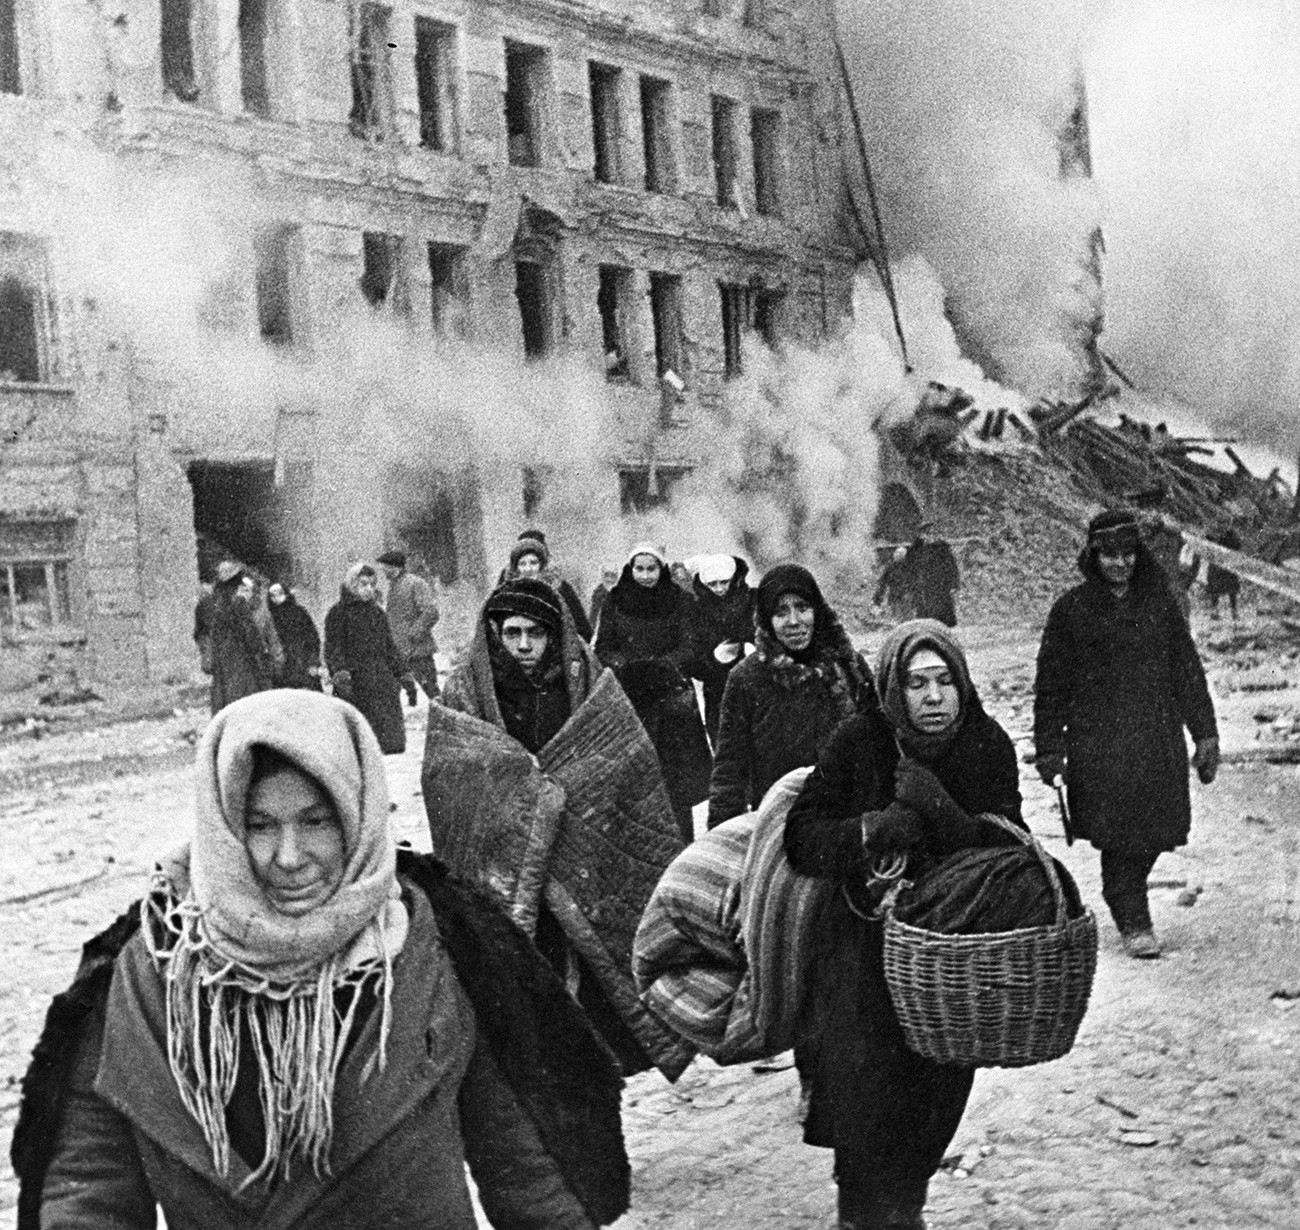 Citizens of Leningrad during the siege of the city (1941 - 1943).